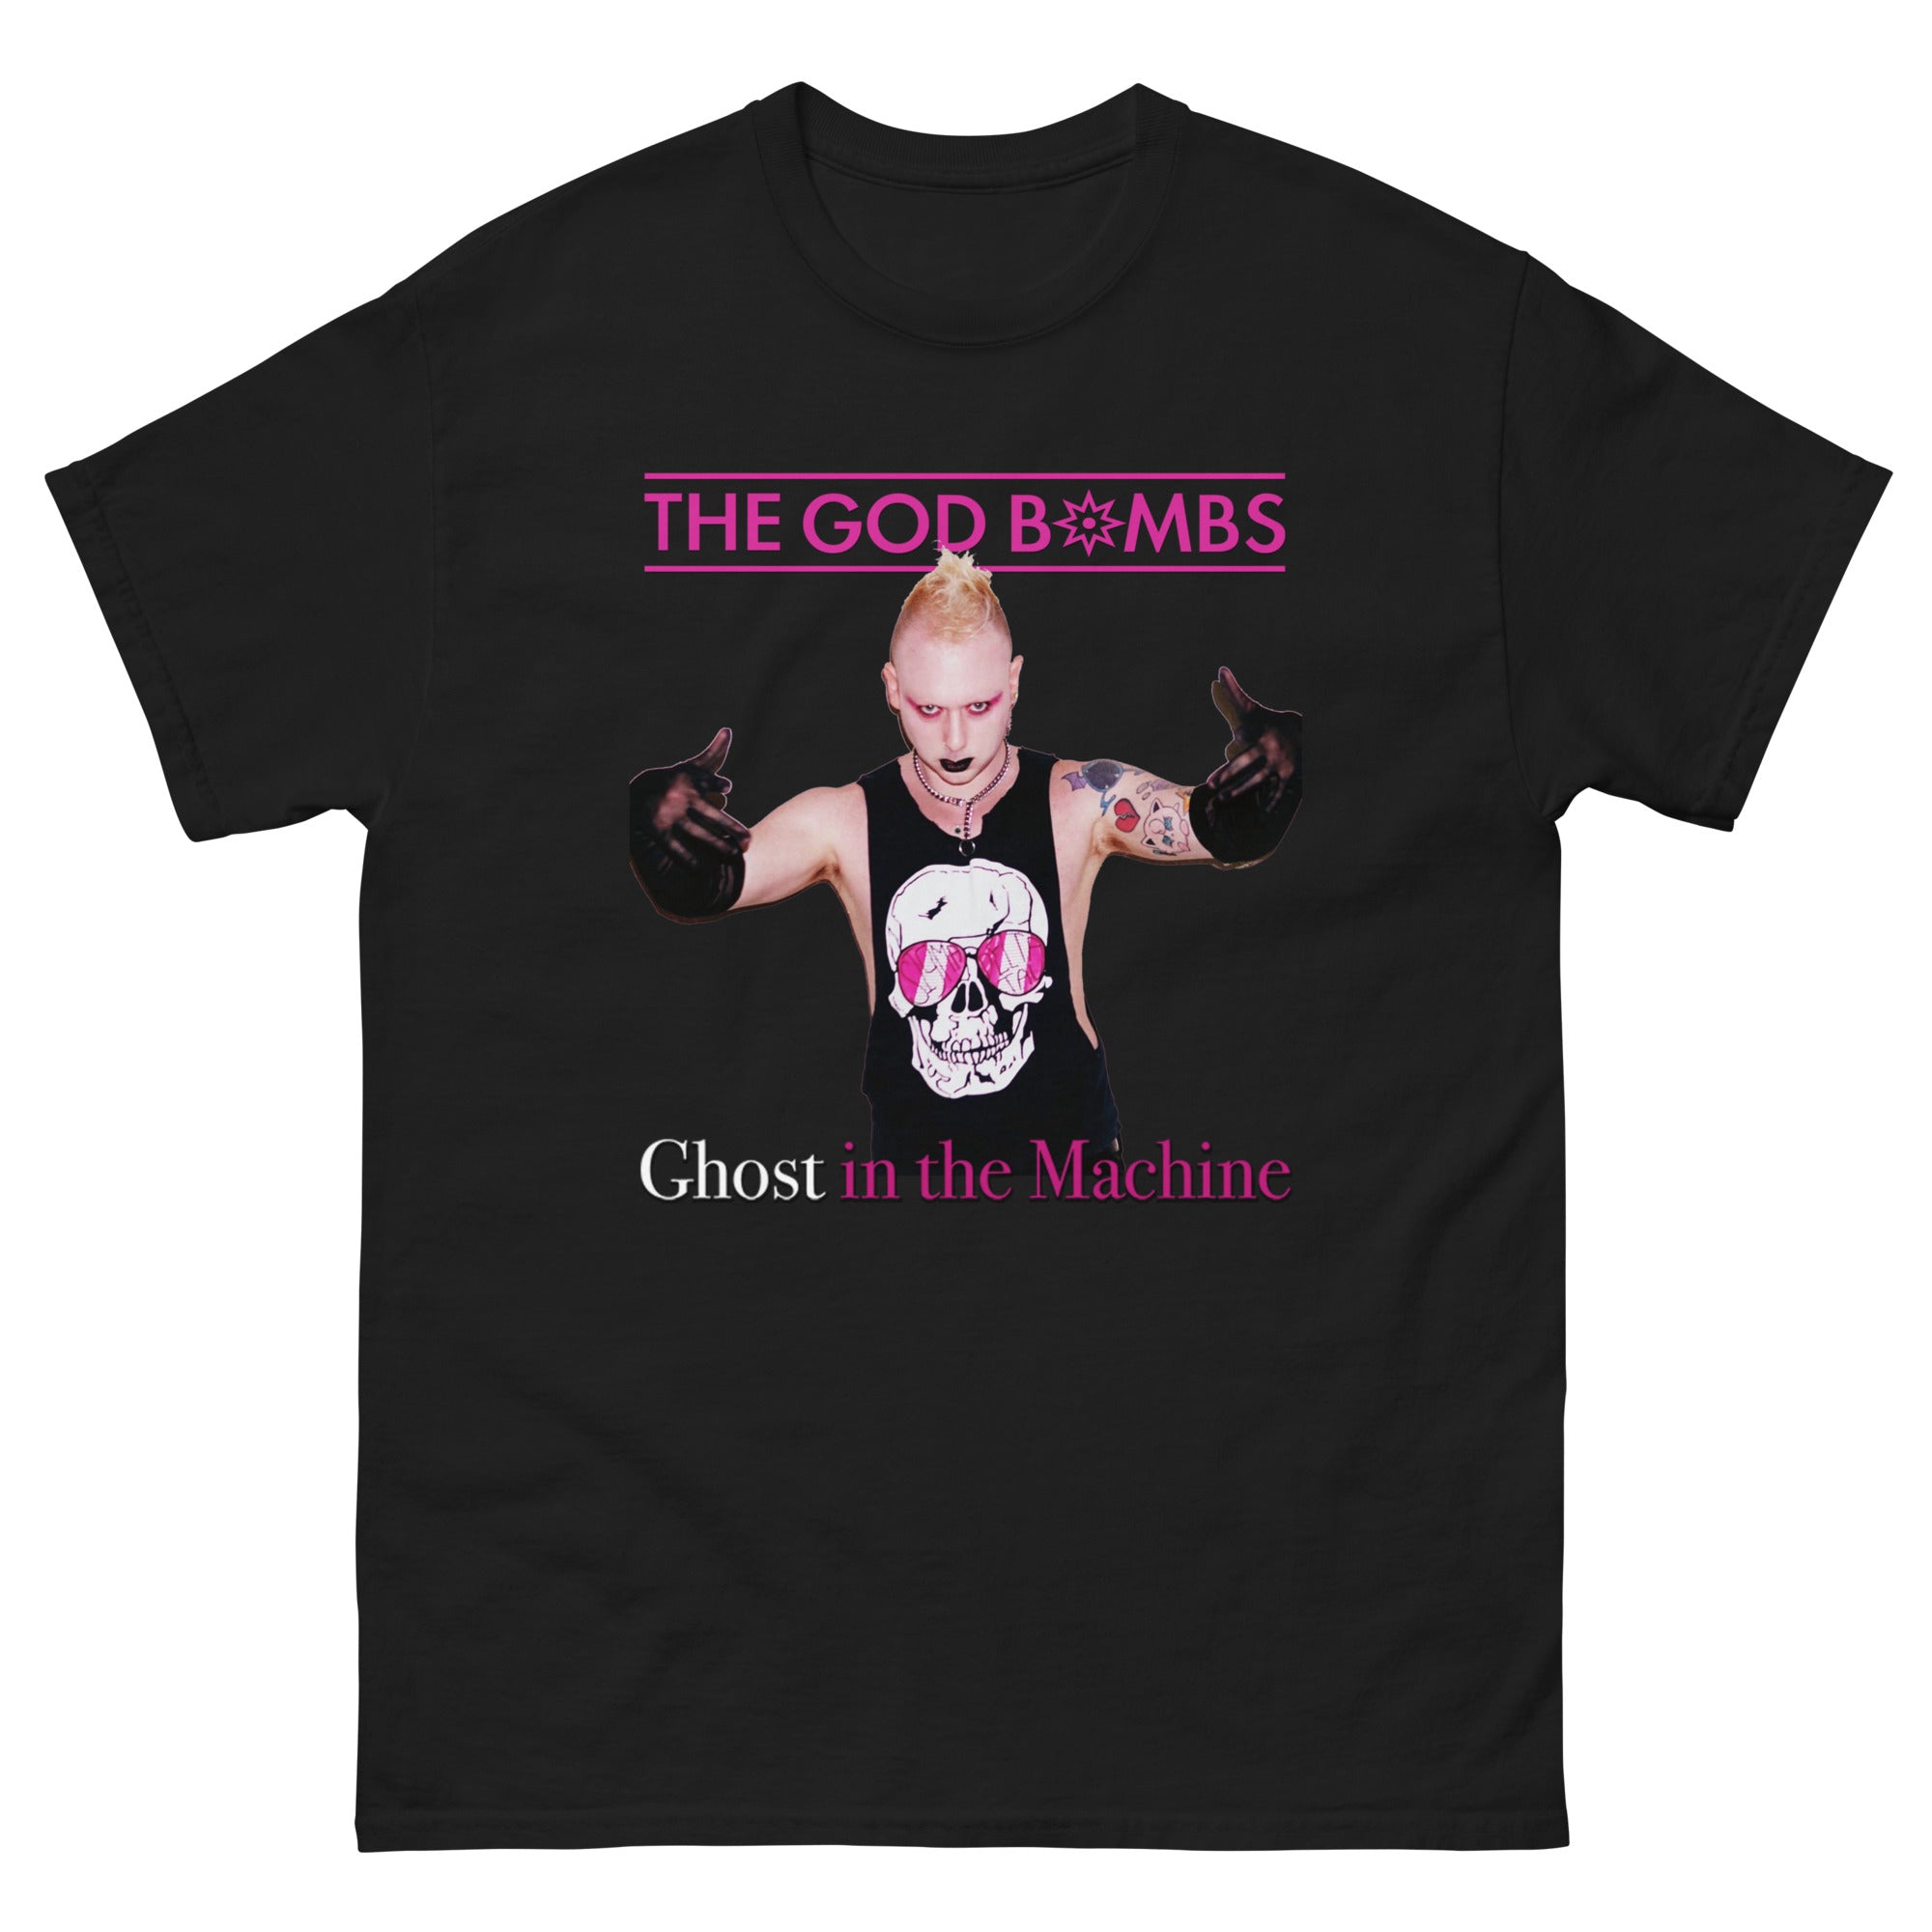 Ghost in the Machine T-shirt